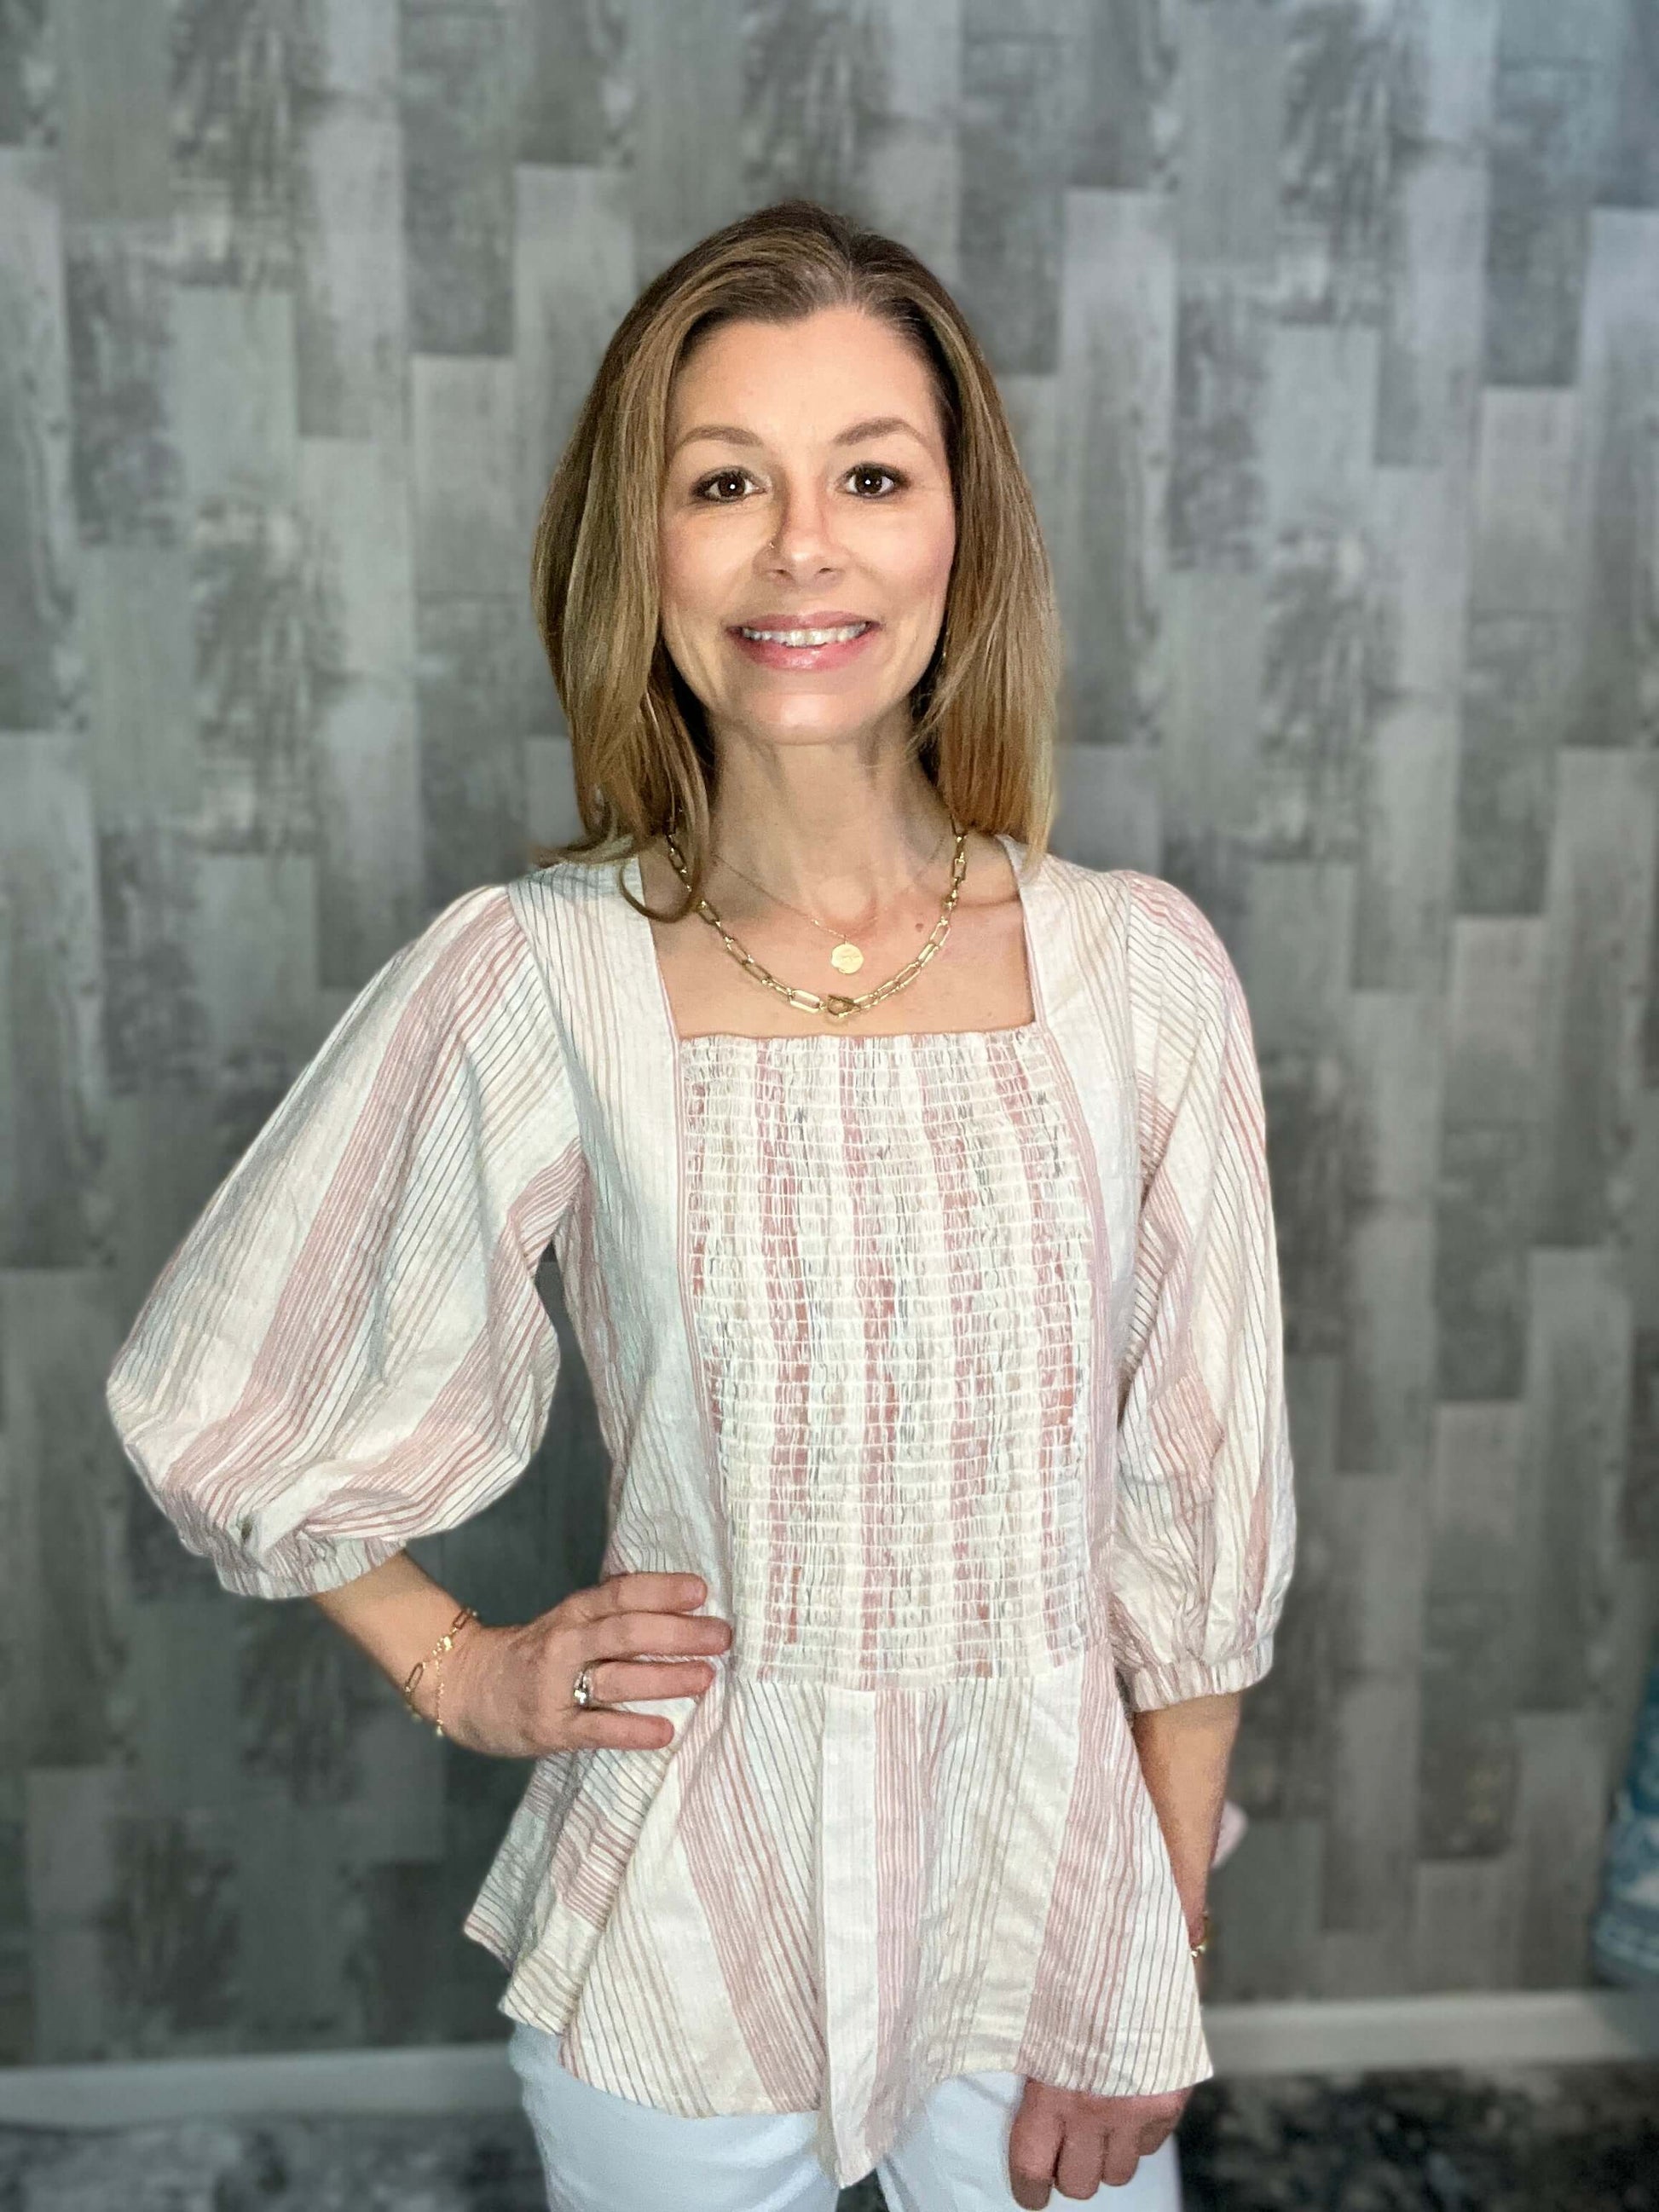 Shirts & Tops 3/4 length sleeve top, 3/4 length top, apparel & accessories, clothing, keyhole back, multi stripe print, peplum hem, shirts & tops, smocked bodice, smocked top, square neck, square neckline Size: Small, Medium, Large